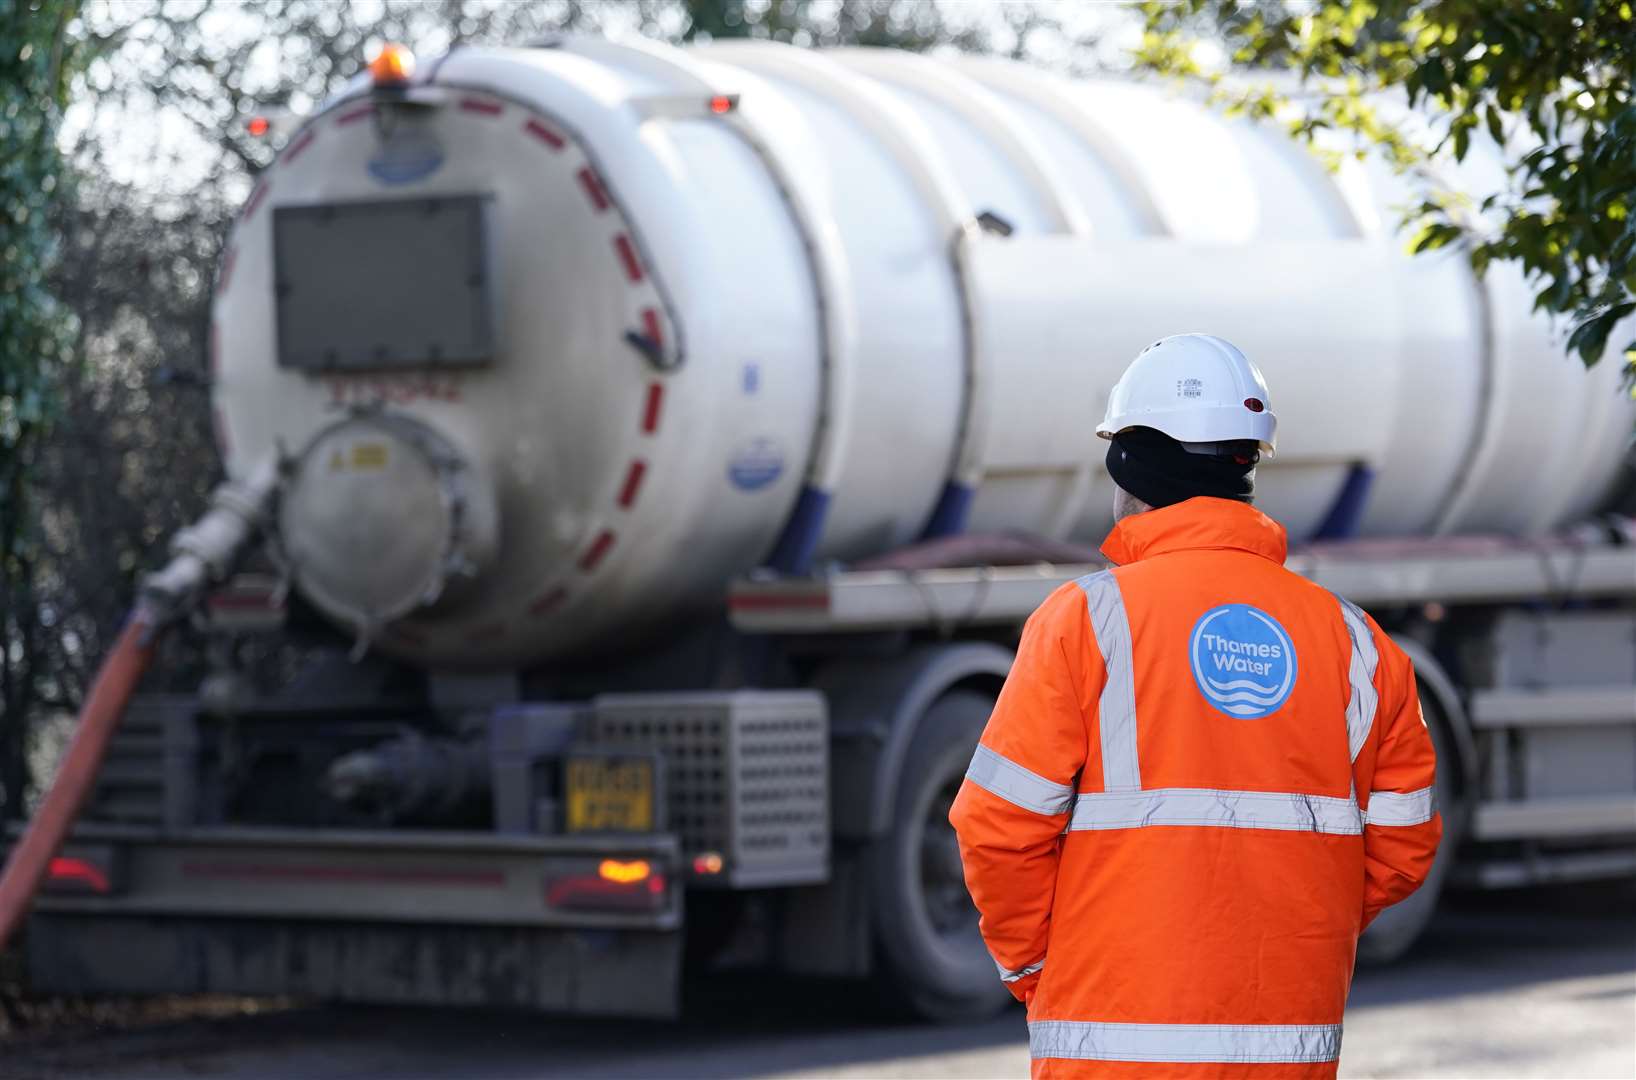 Thames Water has also come under intense scrutiny after missing sewage spill and leakage targets (Andrew Matthews/PA)